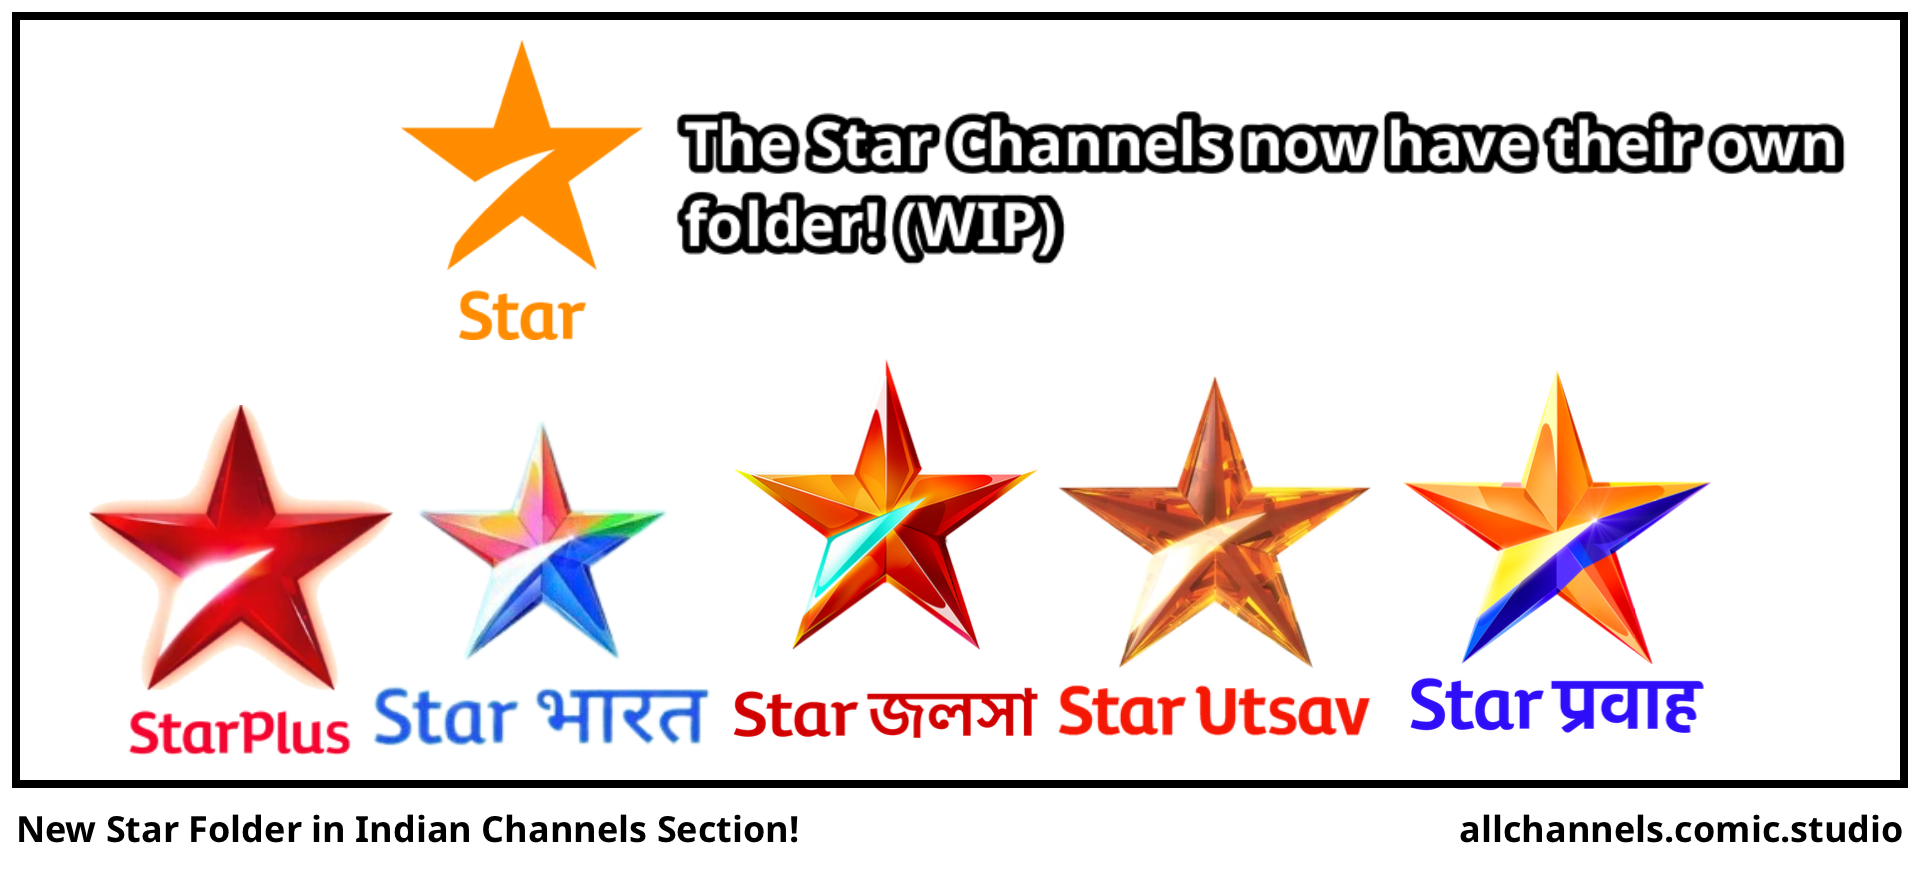 New Star Folder in Indian Channels Section!